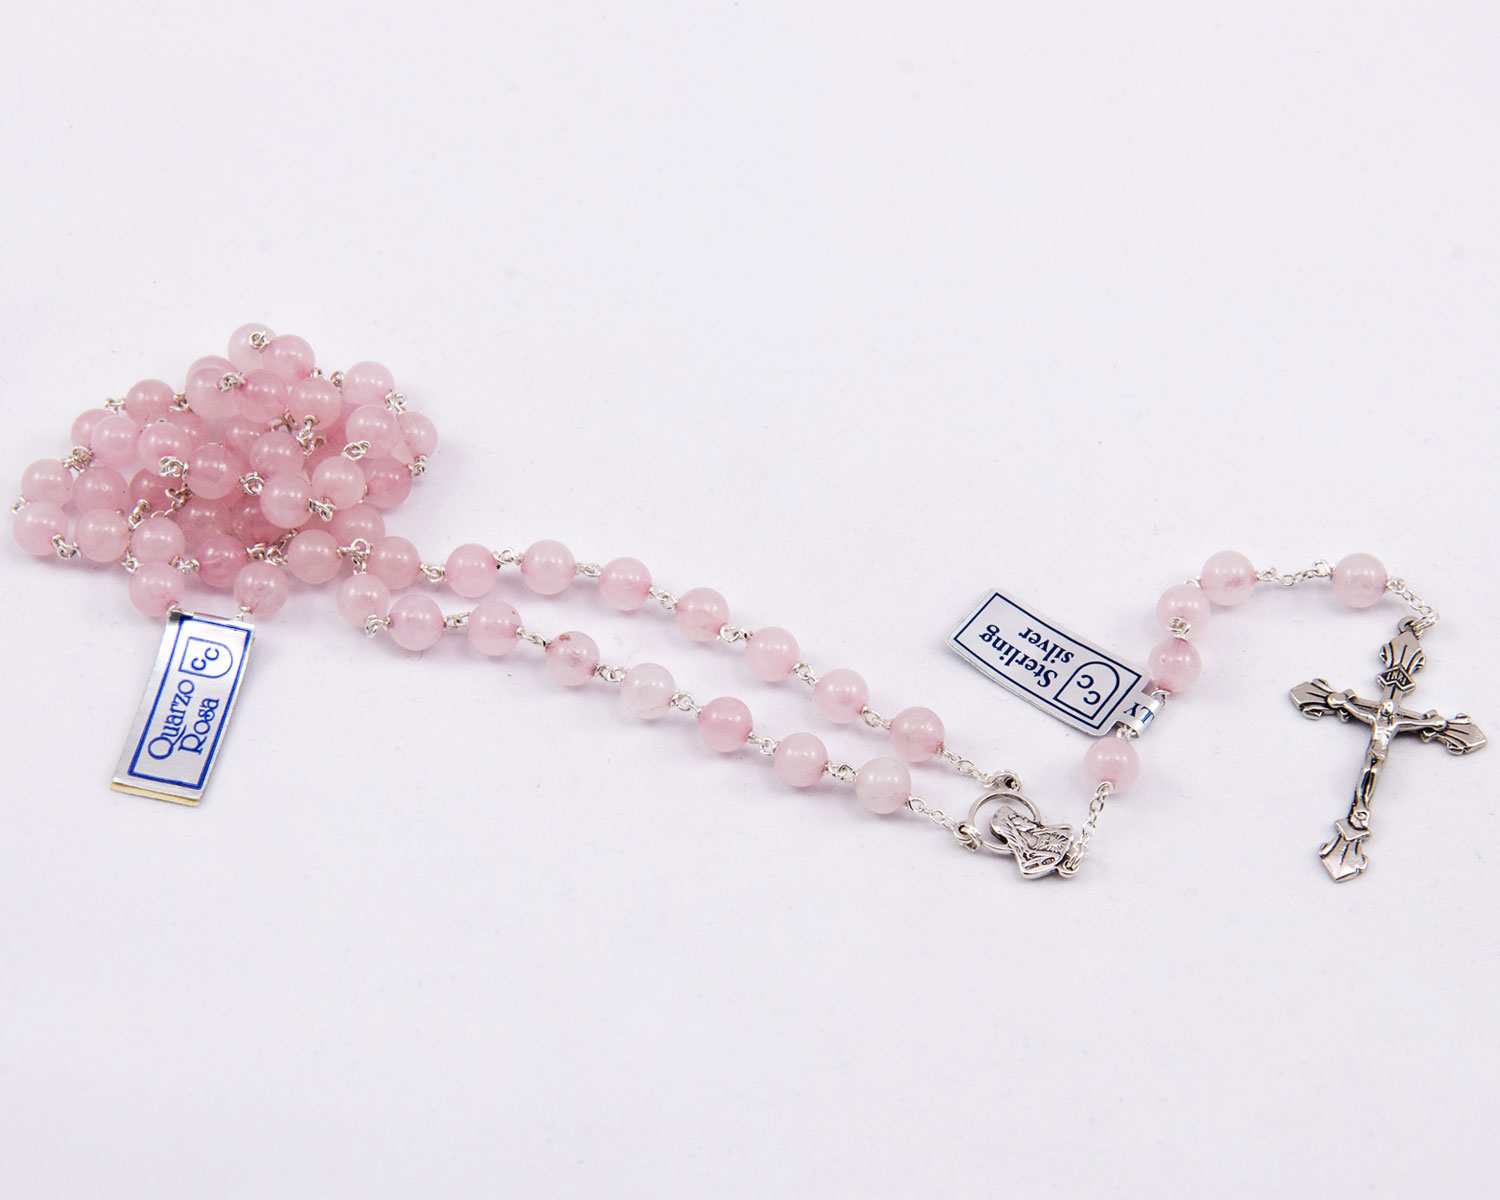 Cherry Blossom Pink Beaded Rosary Chain 6mm Crystal Candy Jade Stone  Antique Silver Plated Per Foot